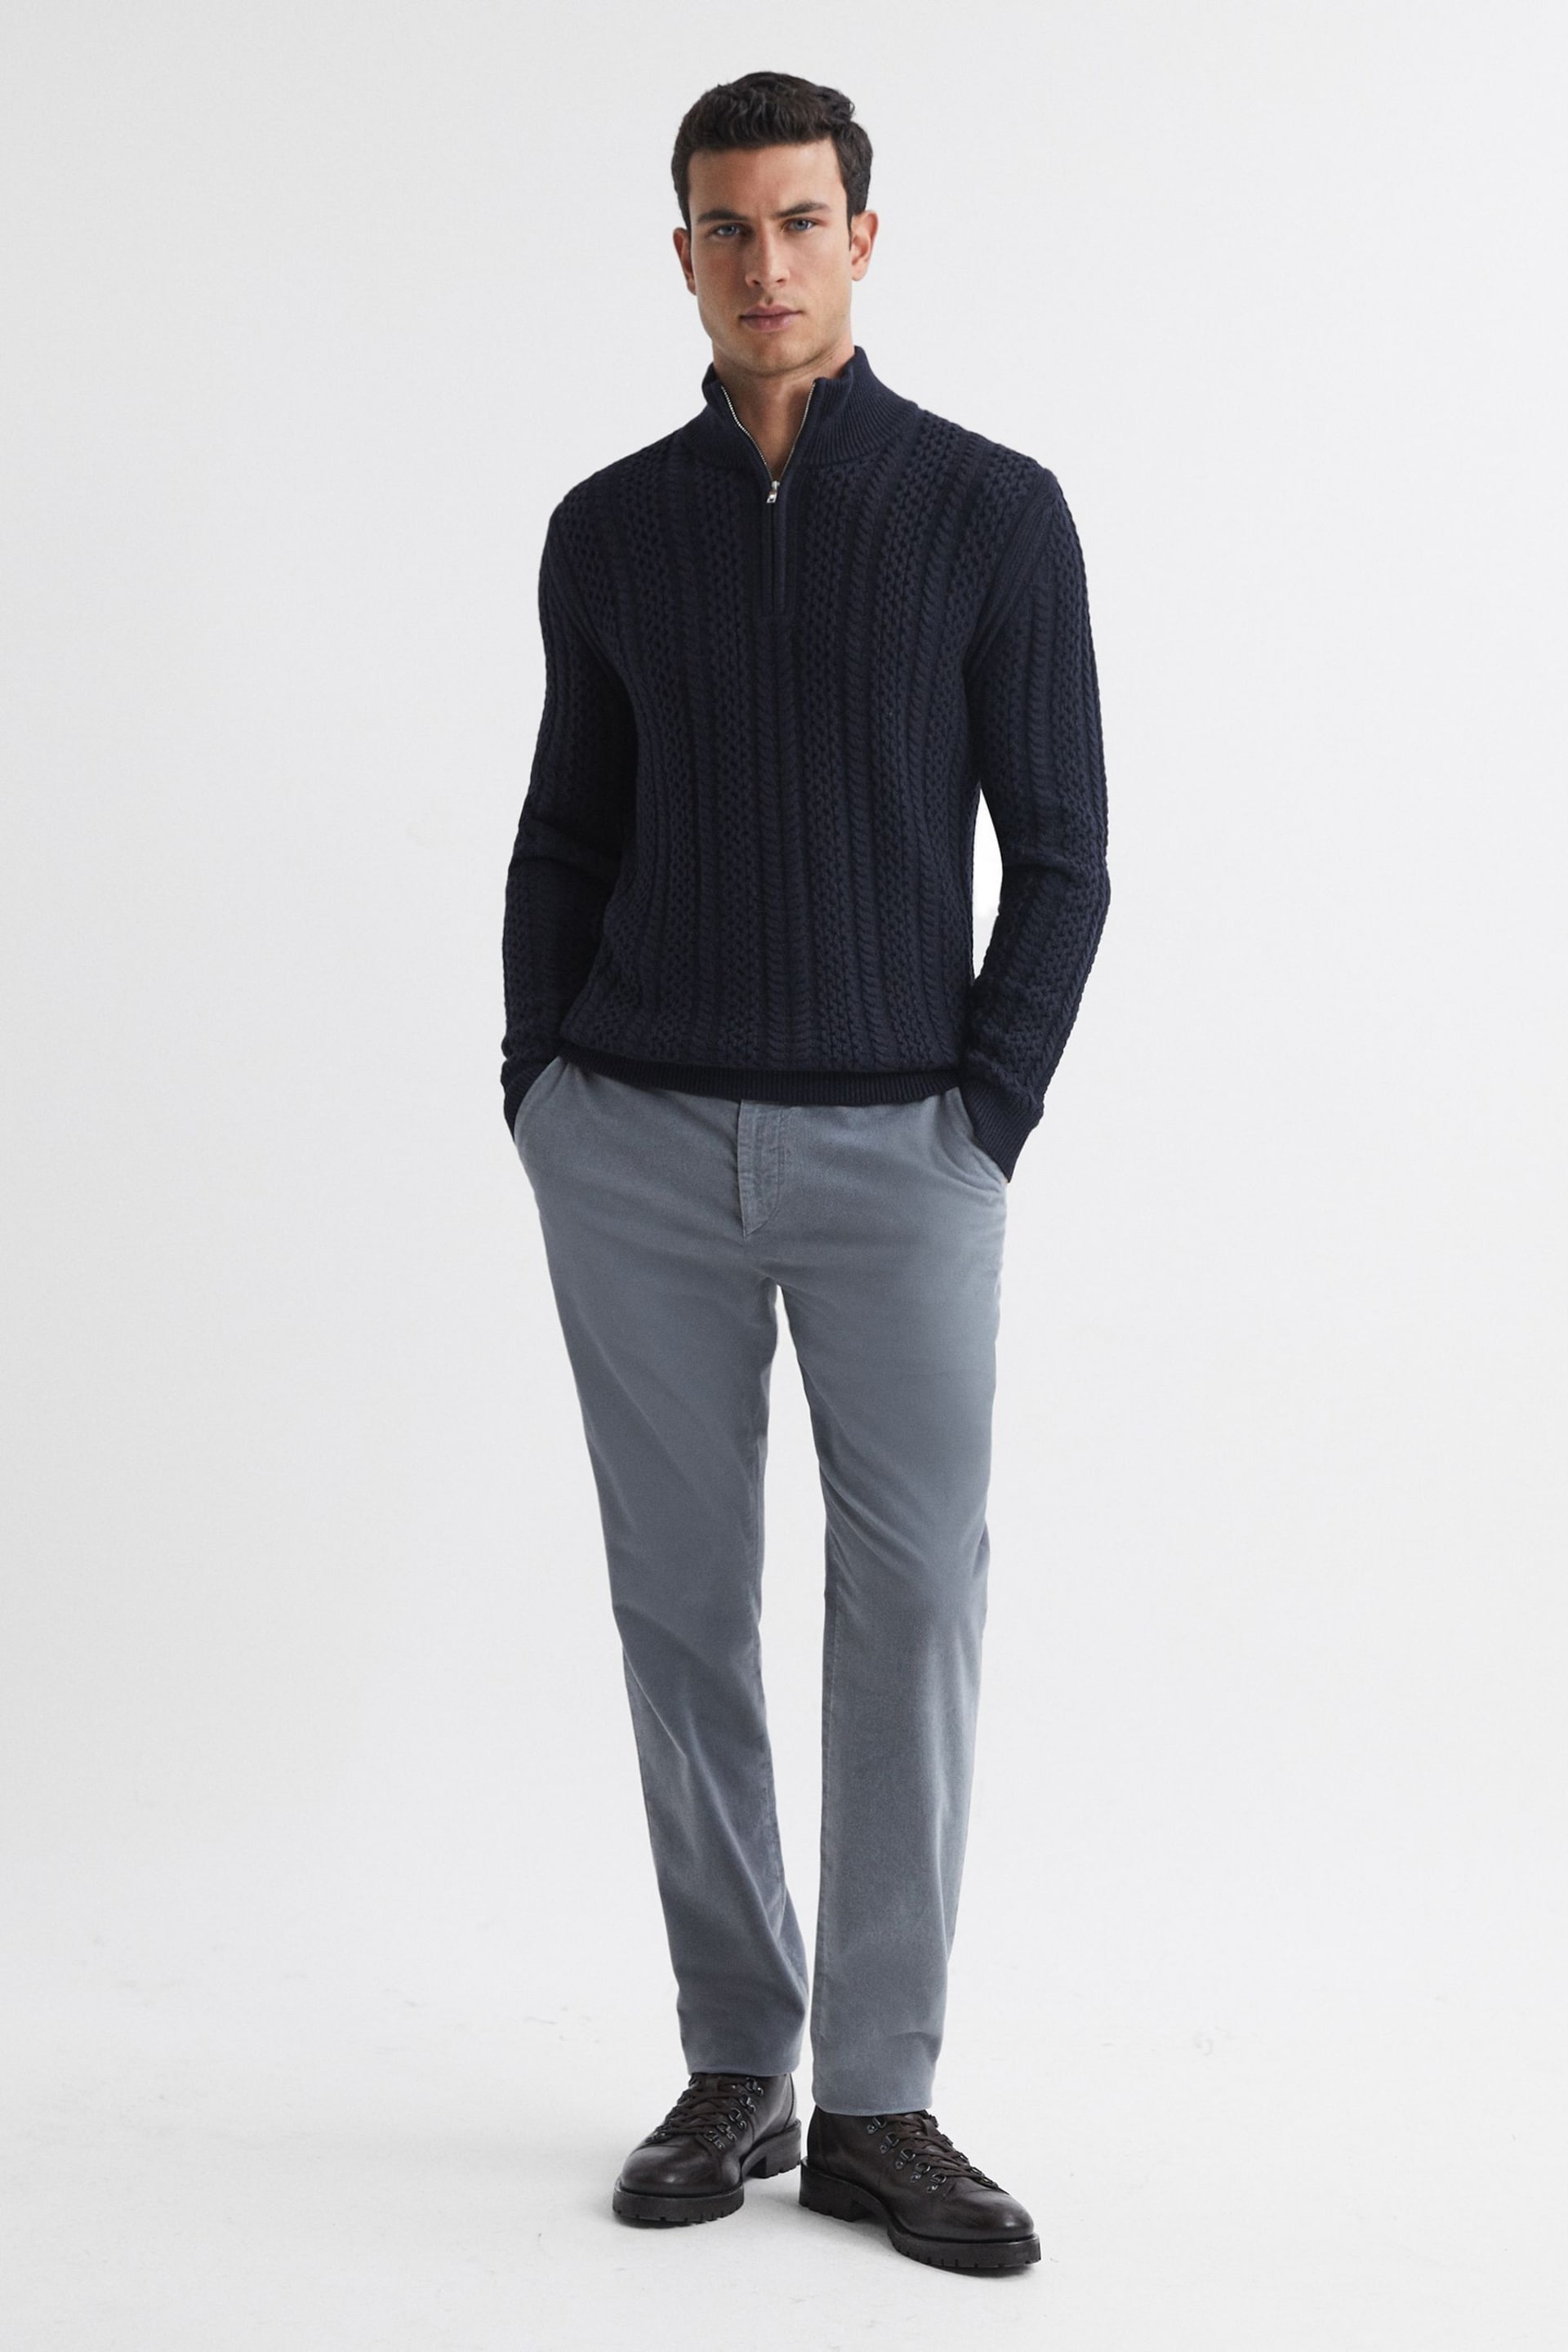 Reiss Navy Bantham Cable Knit Half-Zip Funnel Neck Jumper - Image 4 of 5